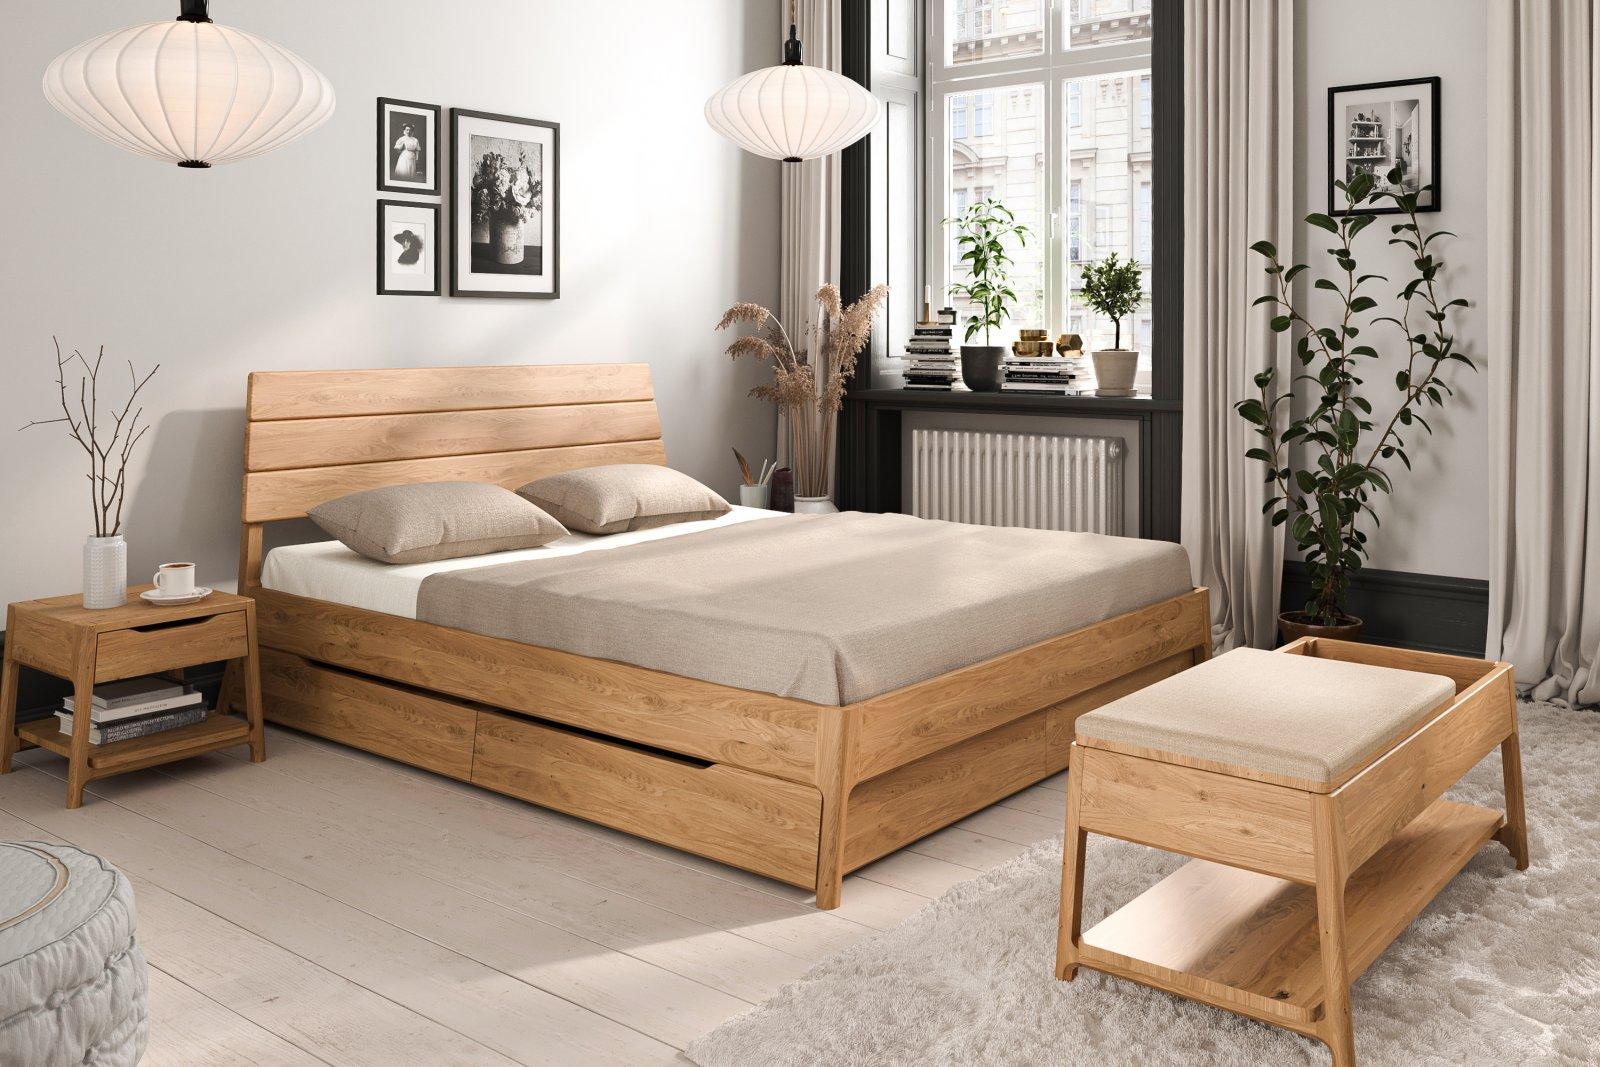 TWIG bed with wooden headboard